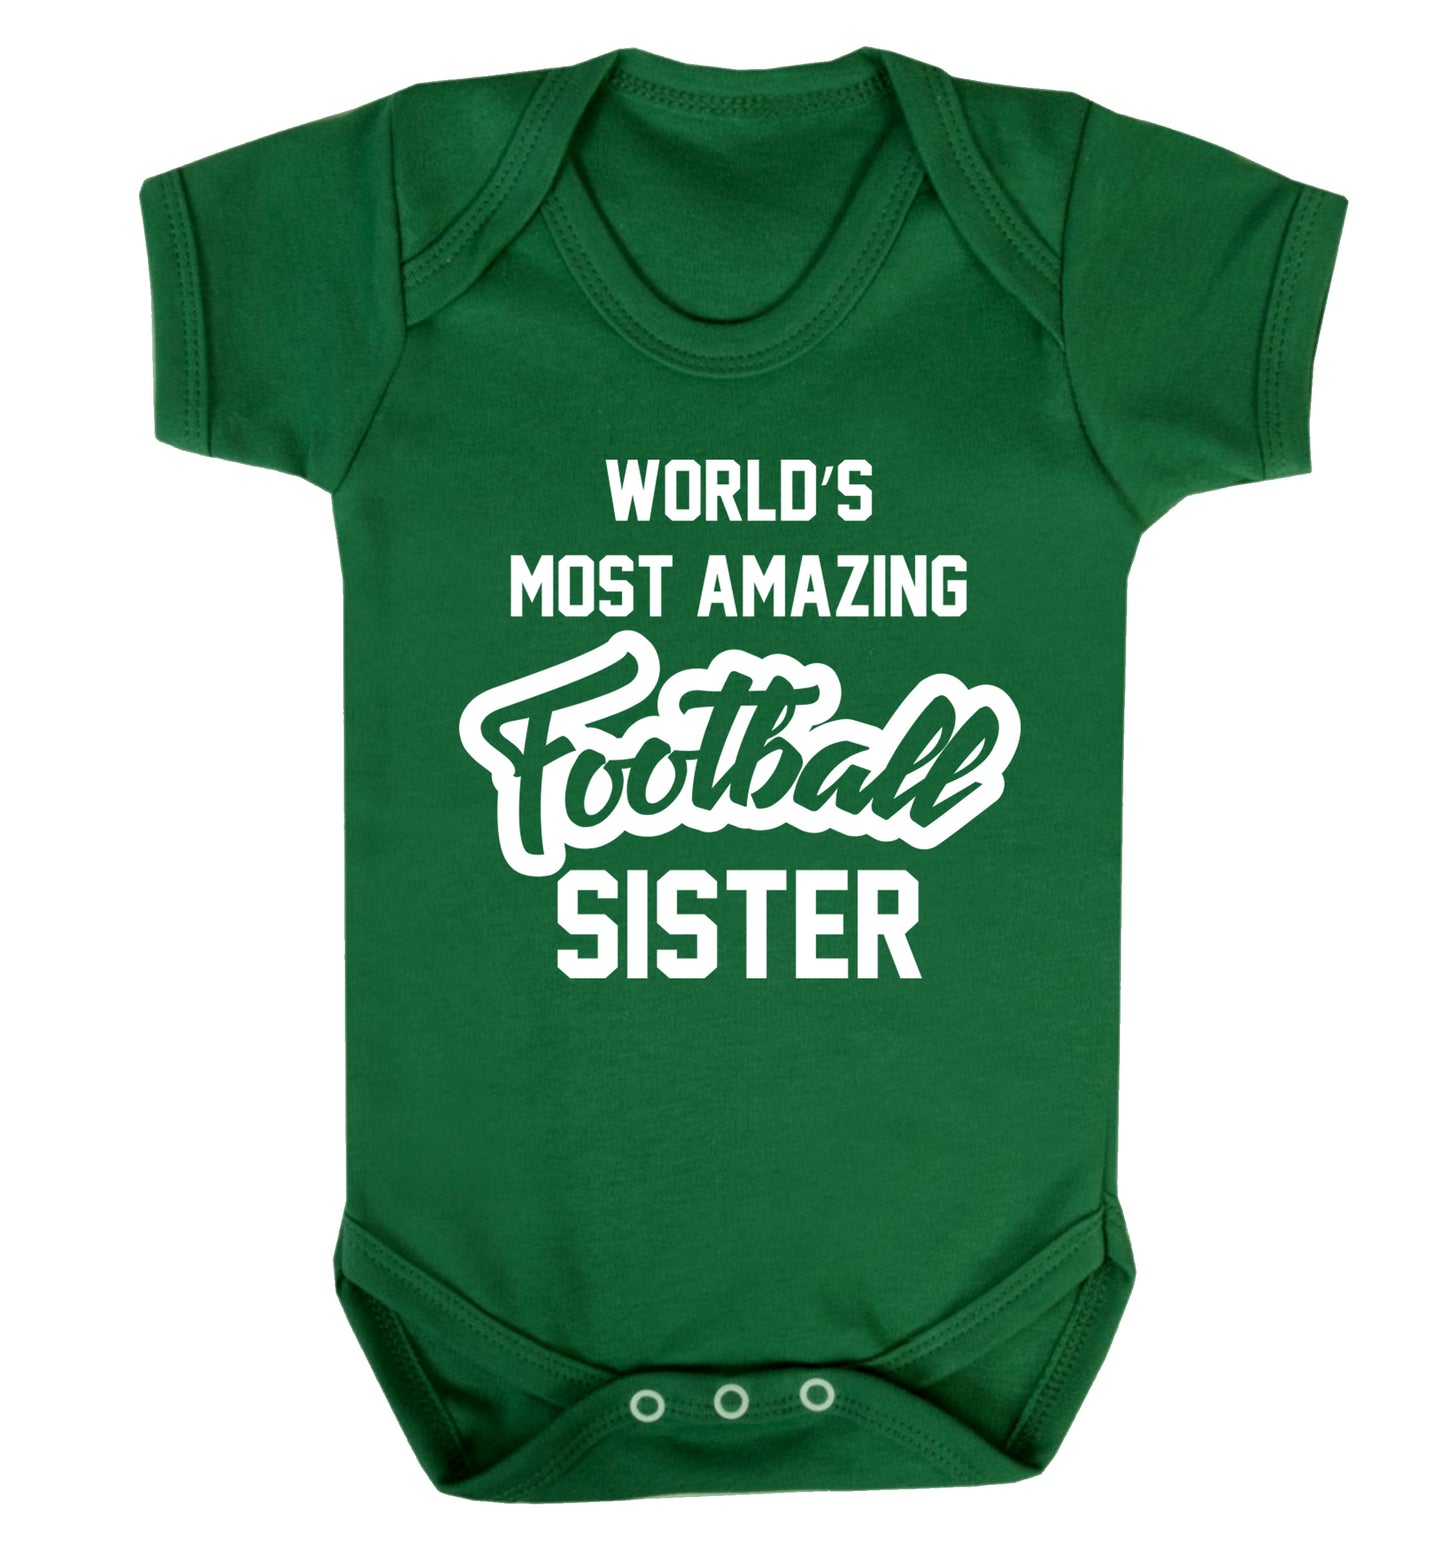 Worlds most amazing football sister Baby Vest green 18-24 months